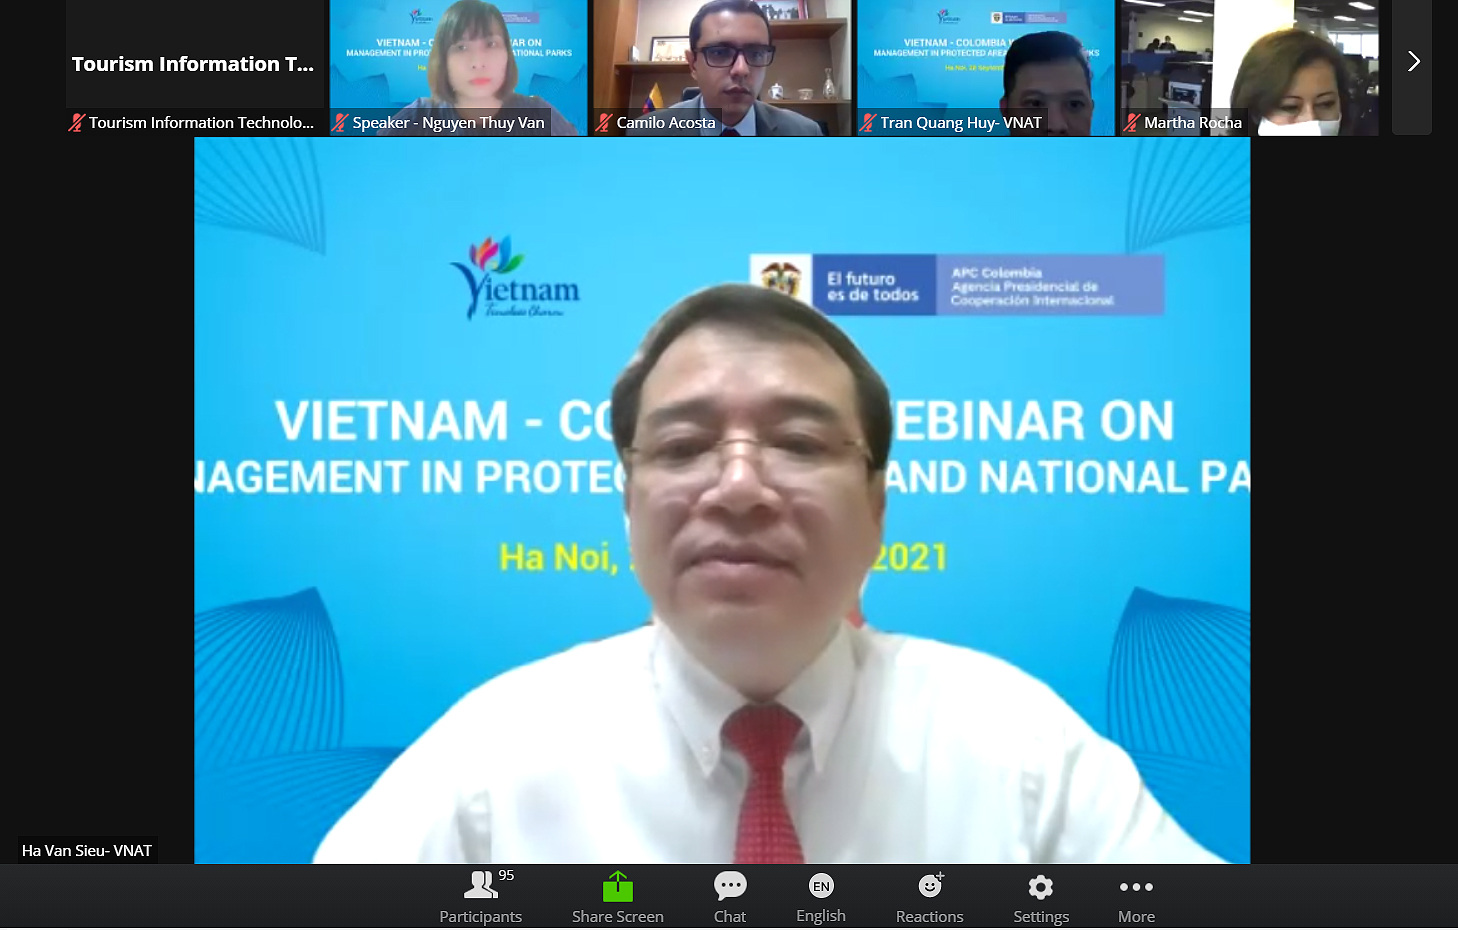 Vietnam and Colombia shares about management in protected areas and national parks